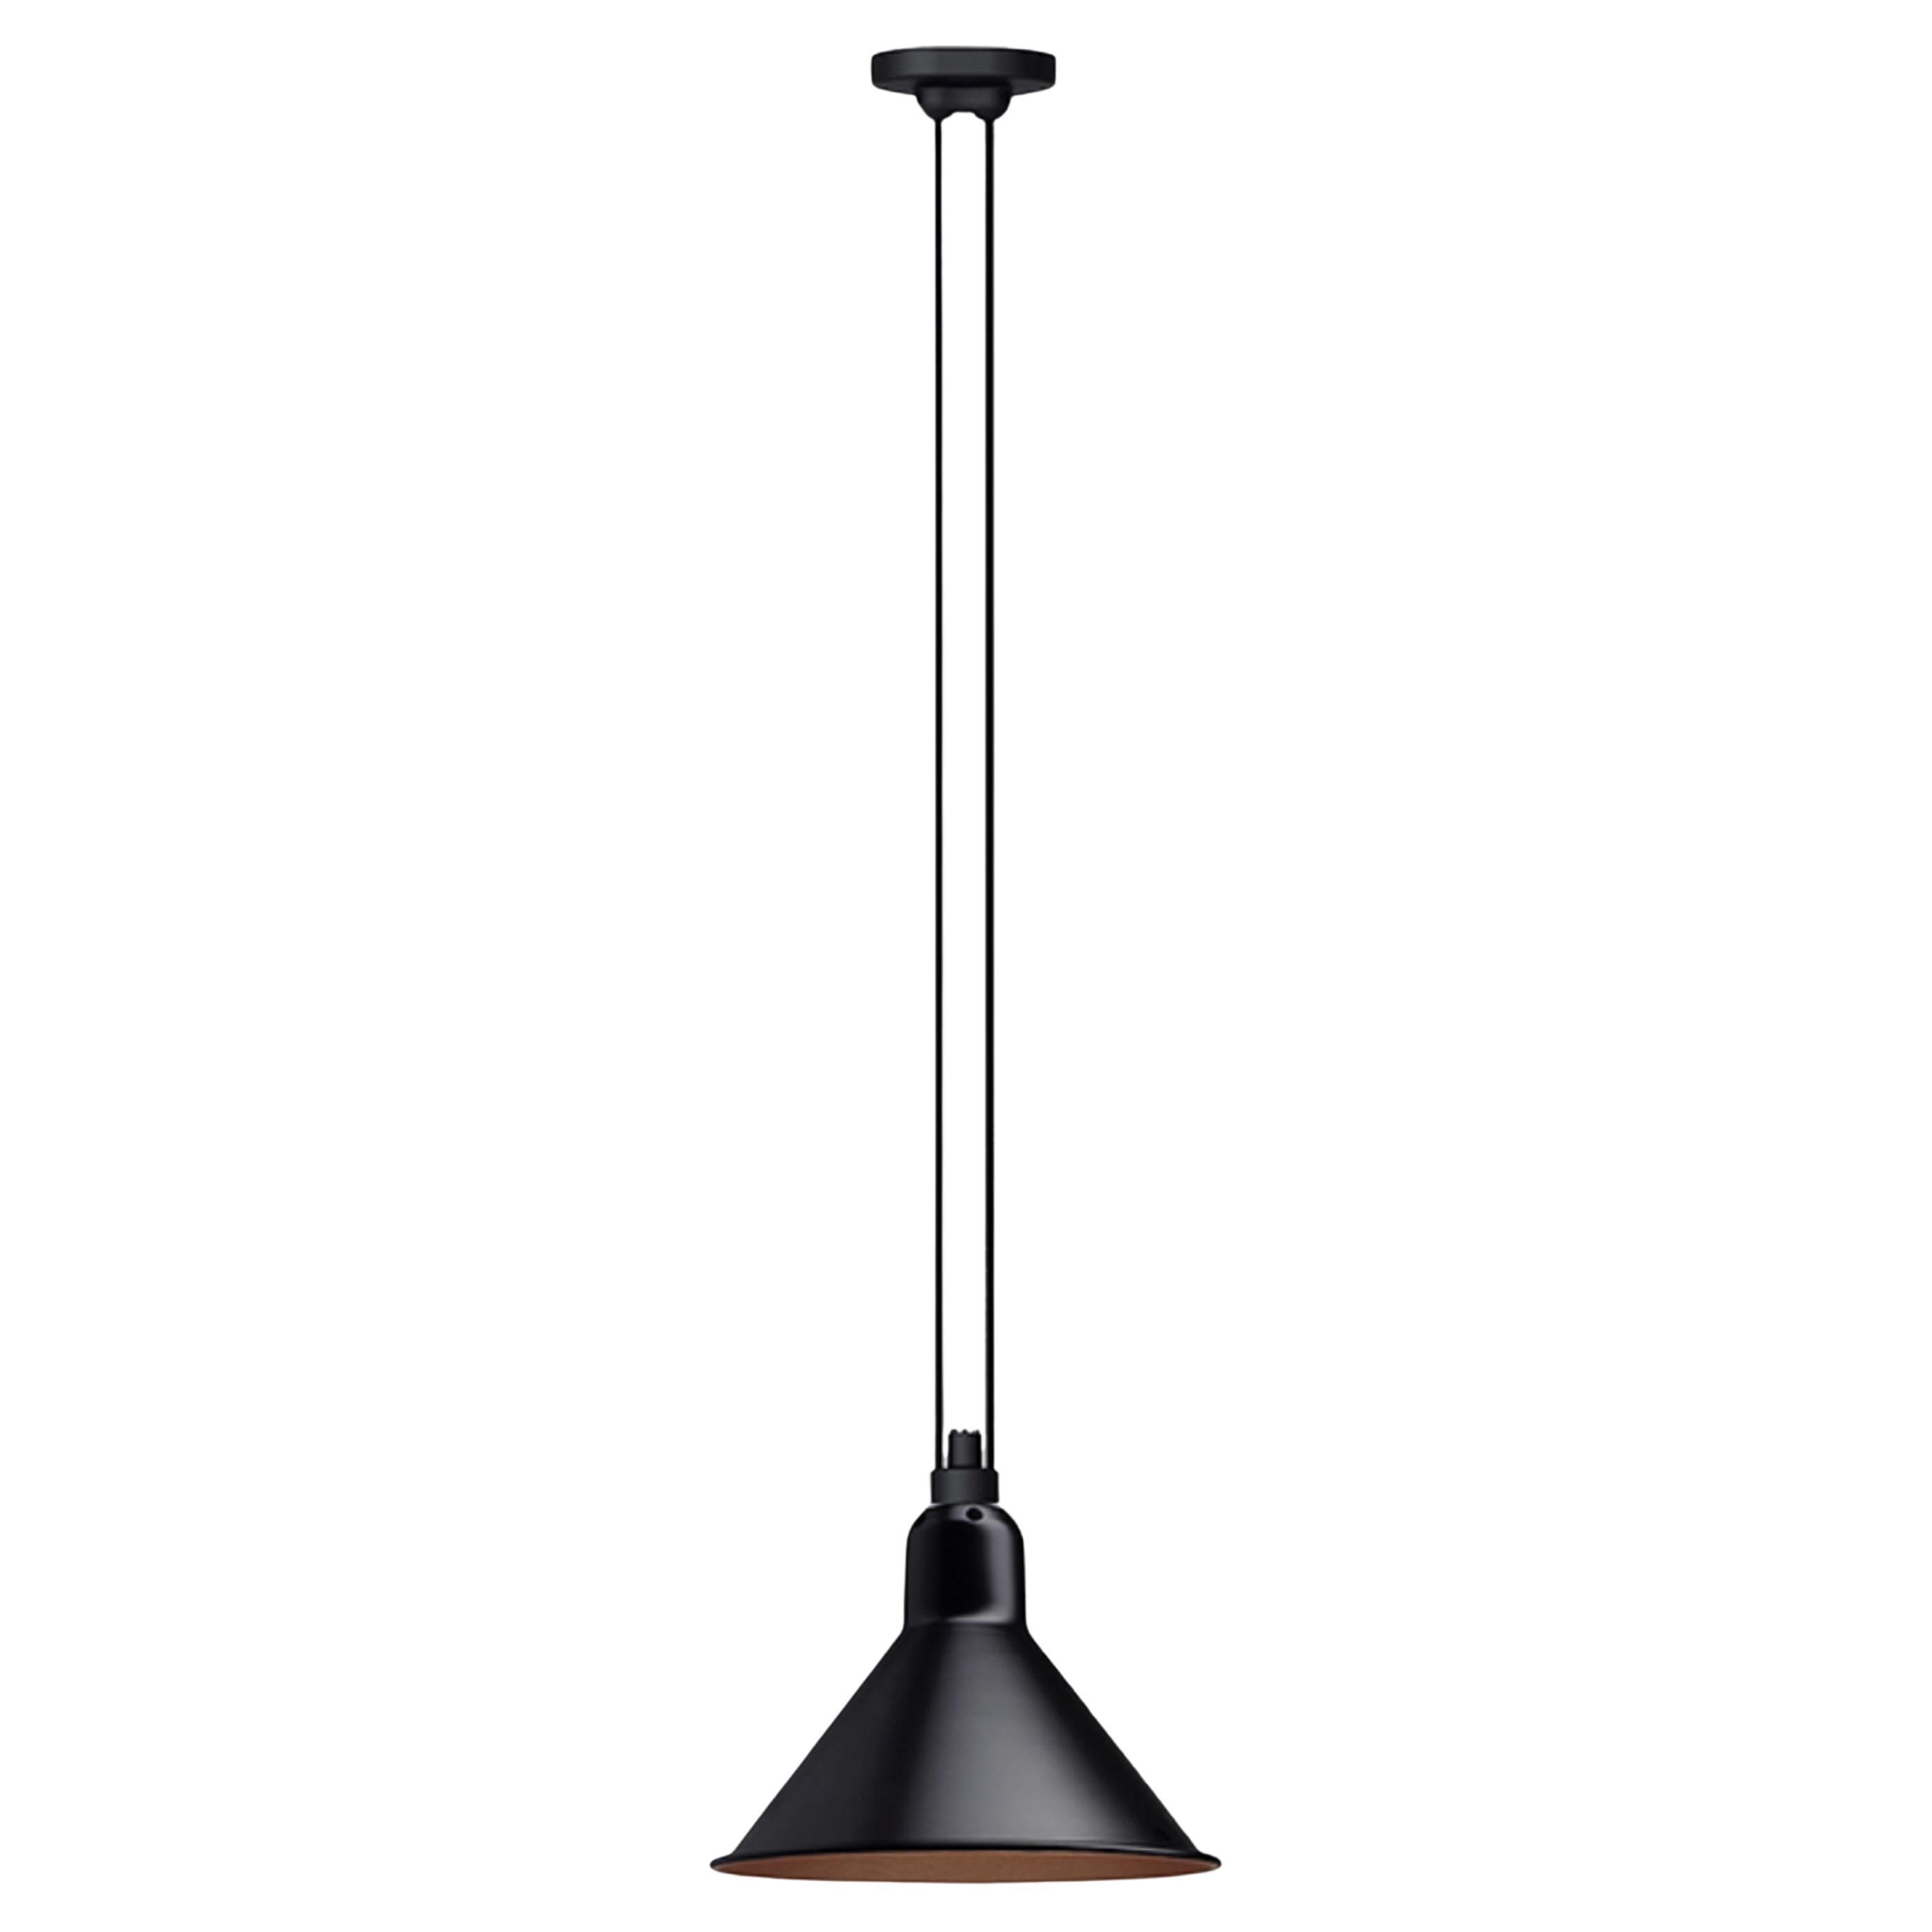 DCW Editions Les Acrobates N°322 Large Conic Pendant Lamp in Black Copper Shade For Sale